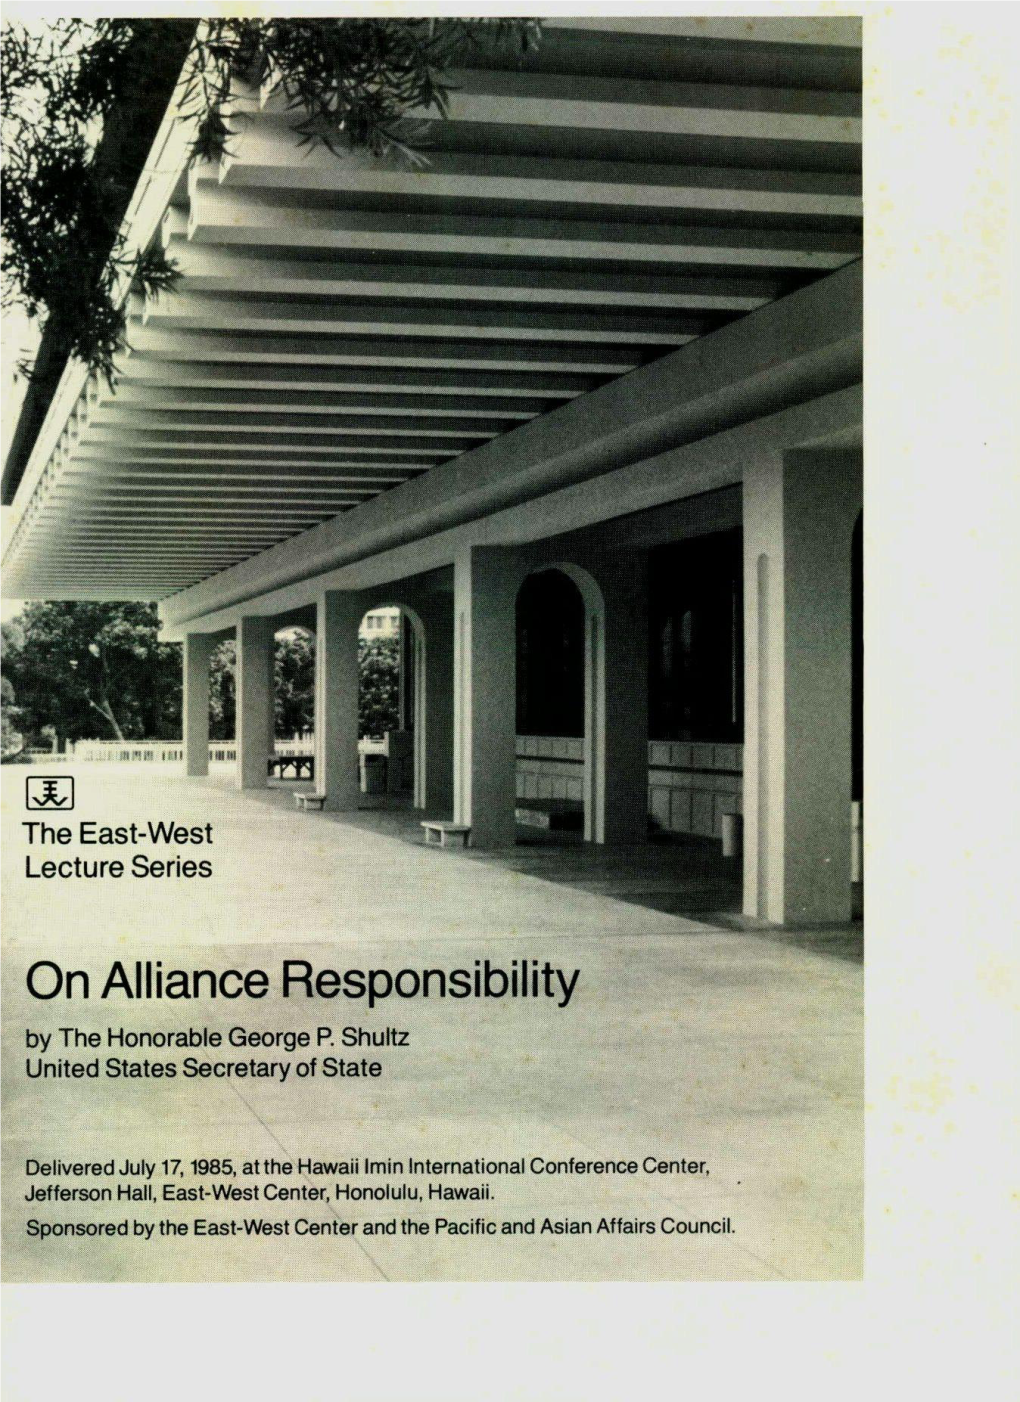 On Alliance Responsibility by the Honorable George P